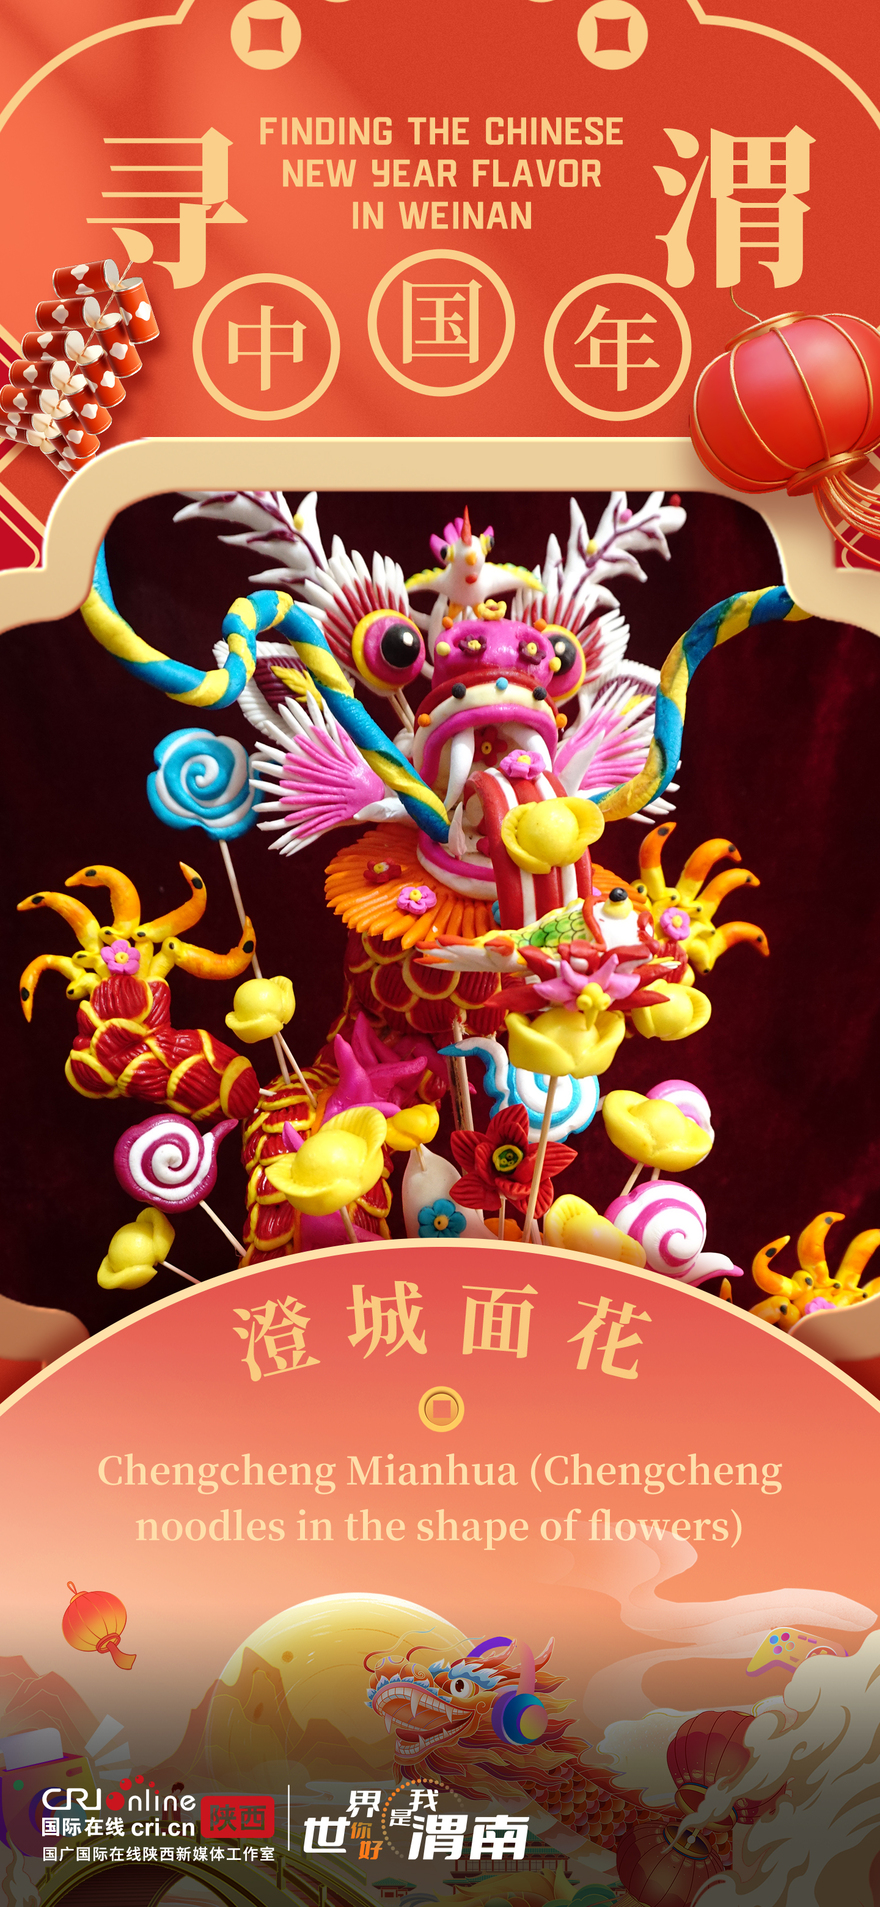 Finding the Chinese New Year Flavor in Weinan_fororder_微信图片_20240209111223